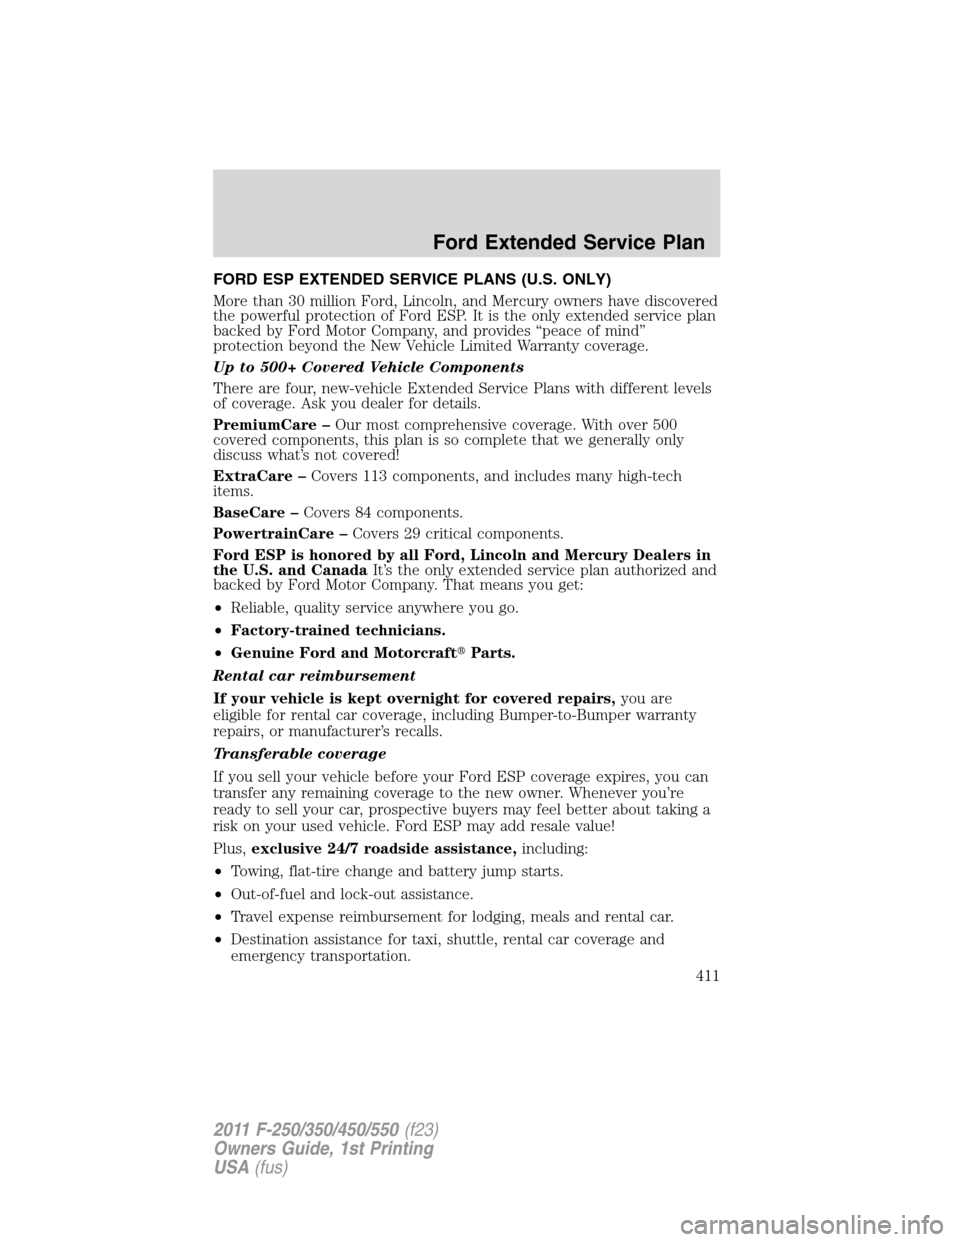 FORD SUPER DUTY 2011 3.G Owners Manual FORD ESP EXTENDED SERVICE PLANS (U.S. ONLY)
More than 30 million Ford, Lincoln, and Mercury owners have discovered
the powerful protection of Ford ESP. It is the only extended service plan
backed by F